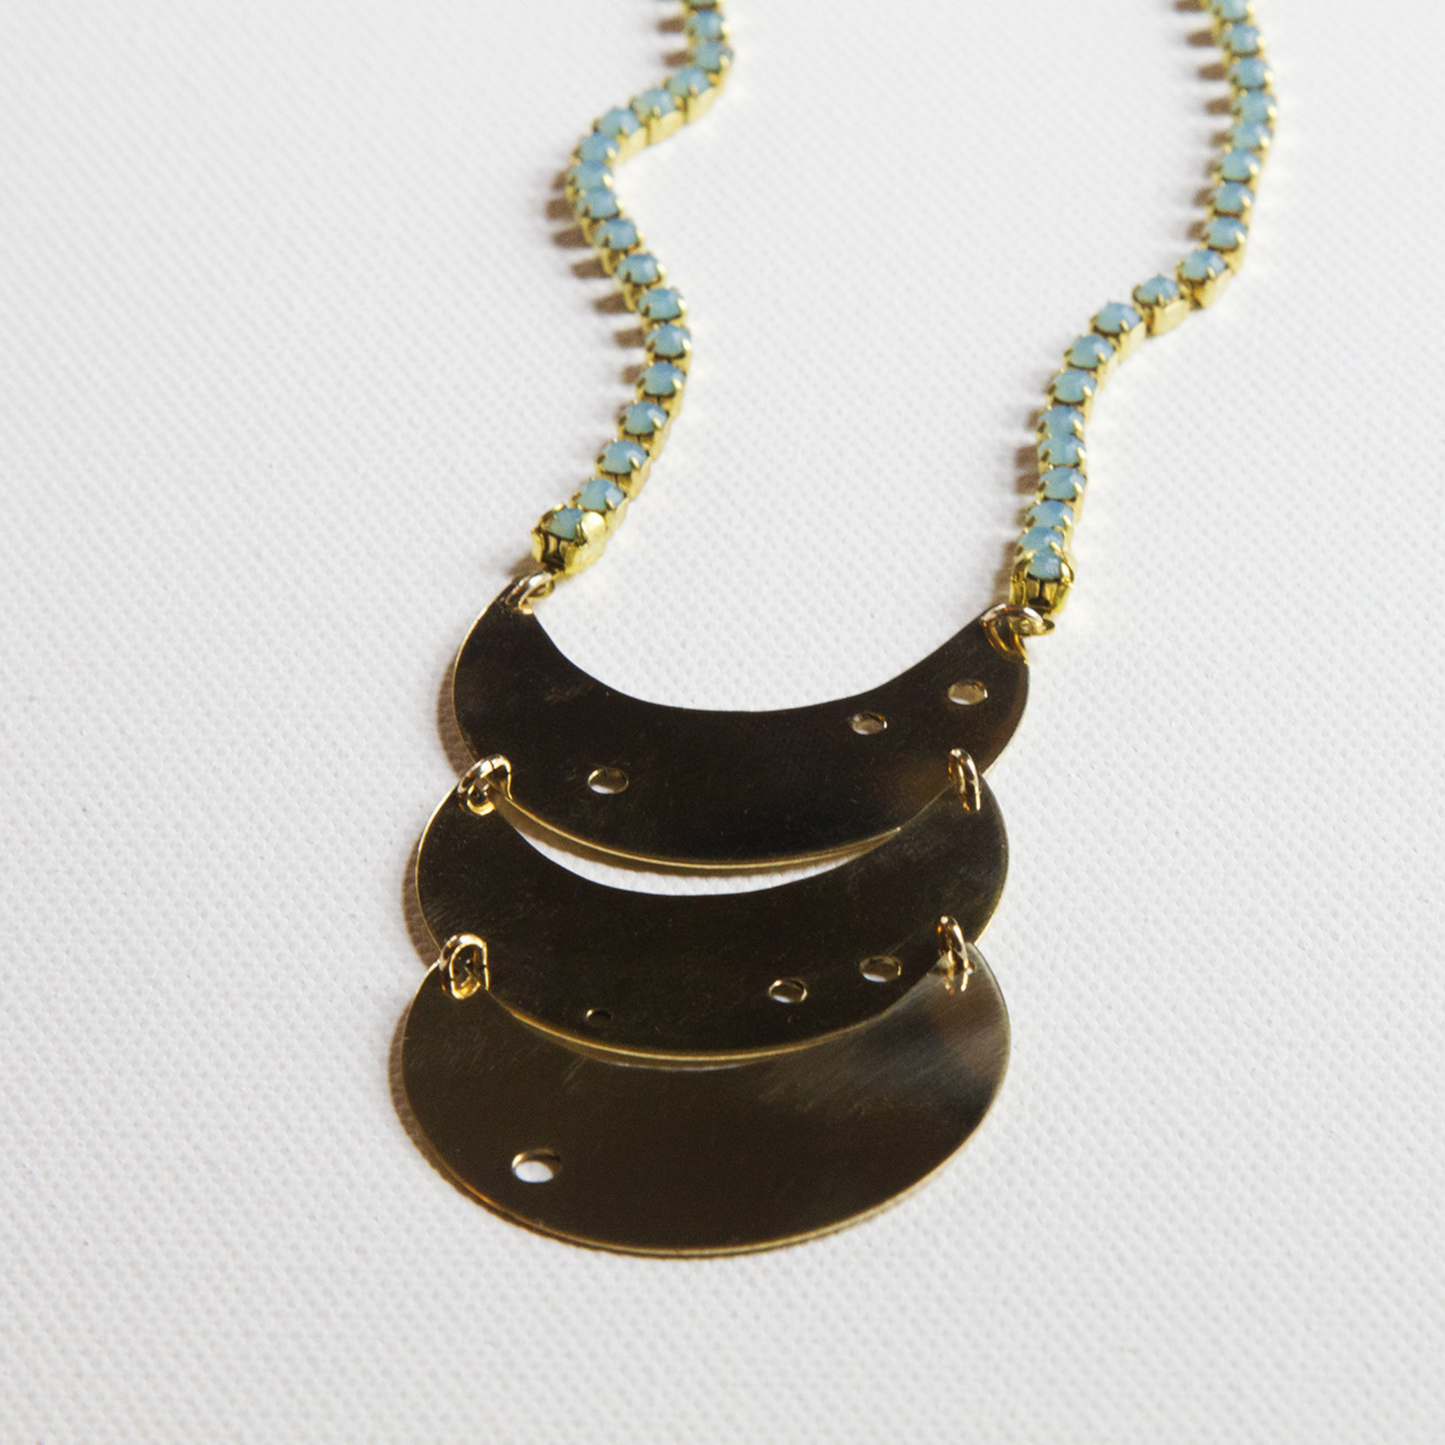 Handcrafted Celestial Ladder Necklace